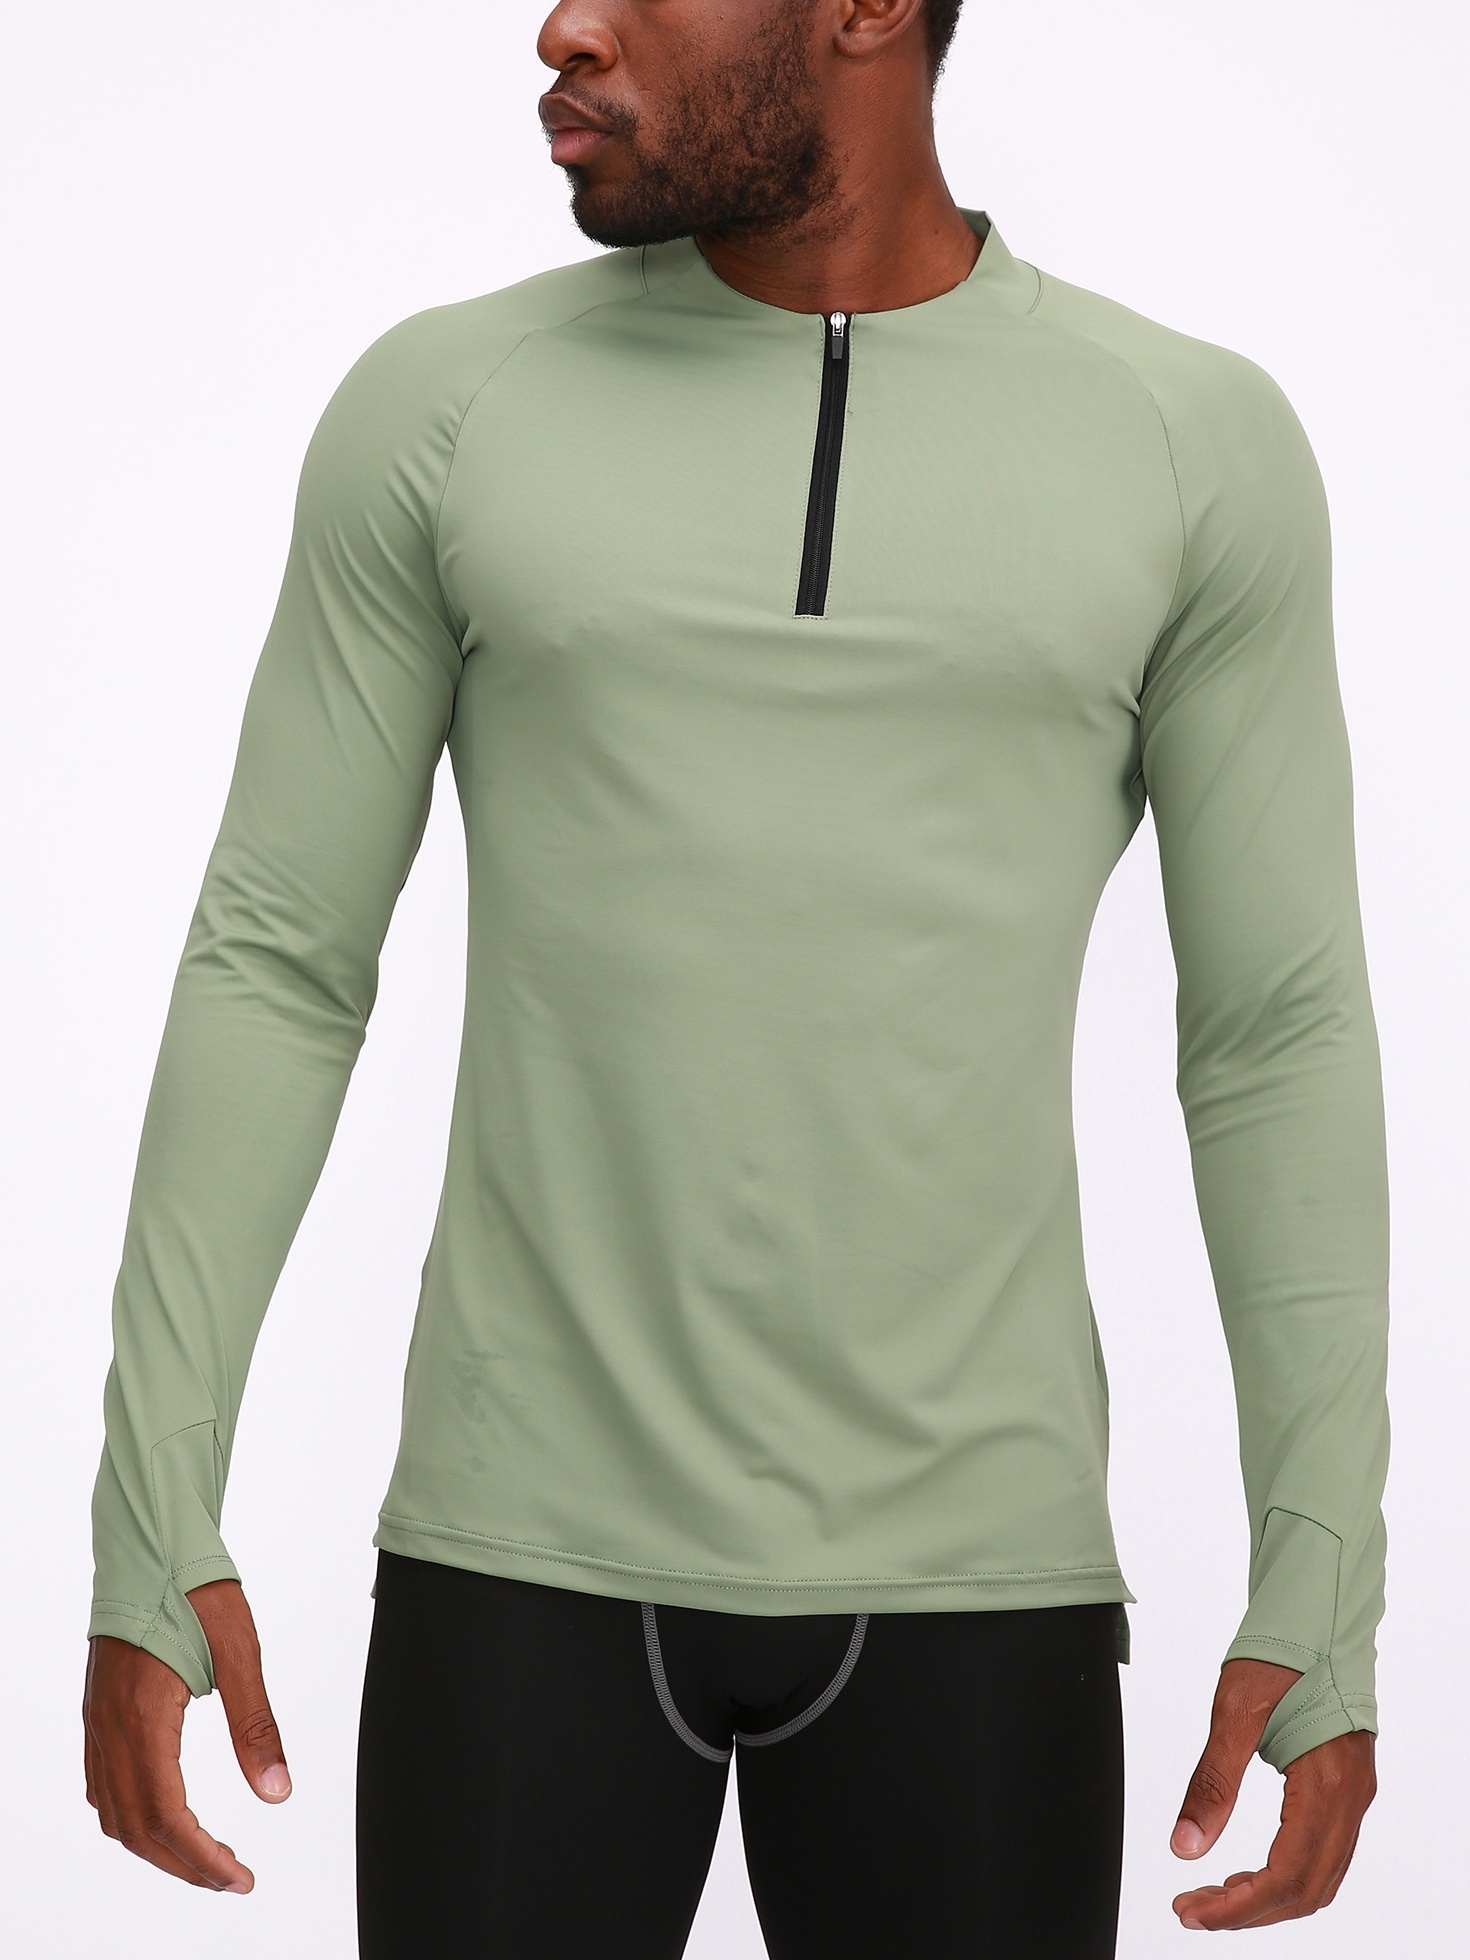 Men's Compression Long Sleeve Sport Fitness Workout Top, Cool Dry